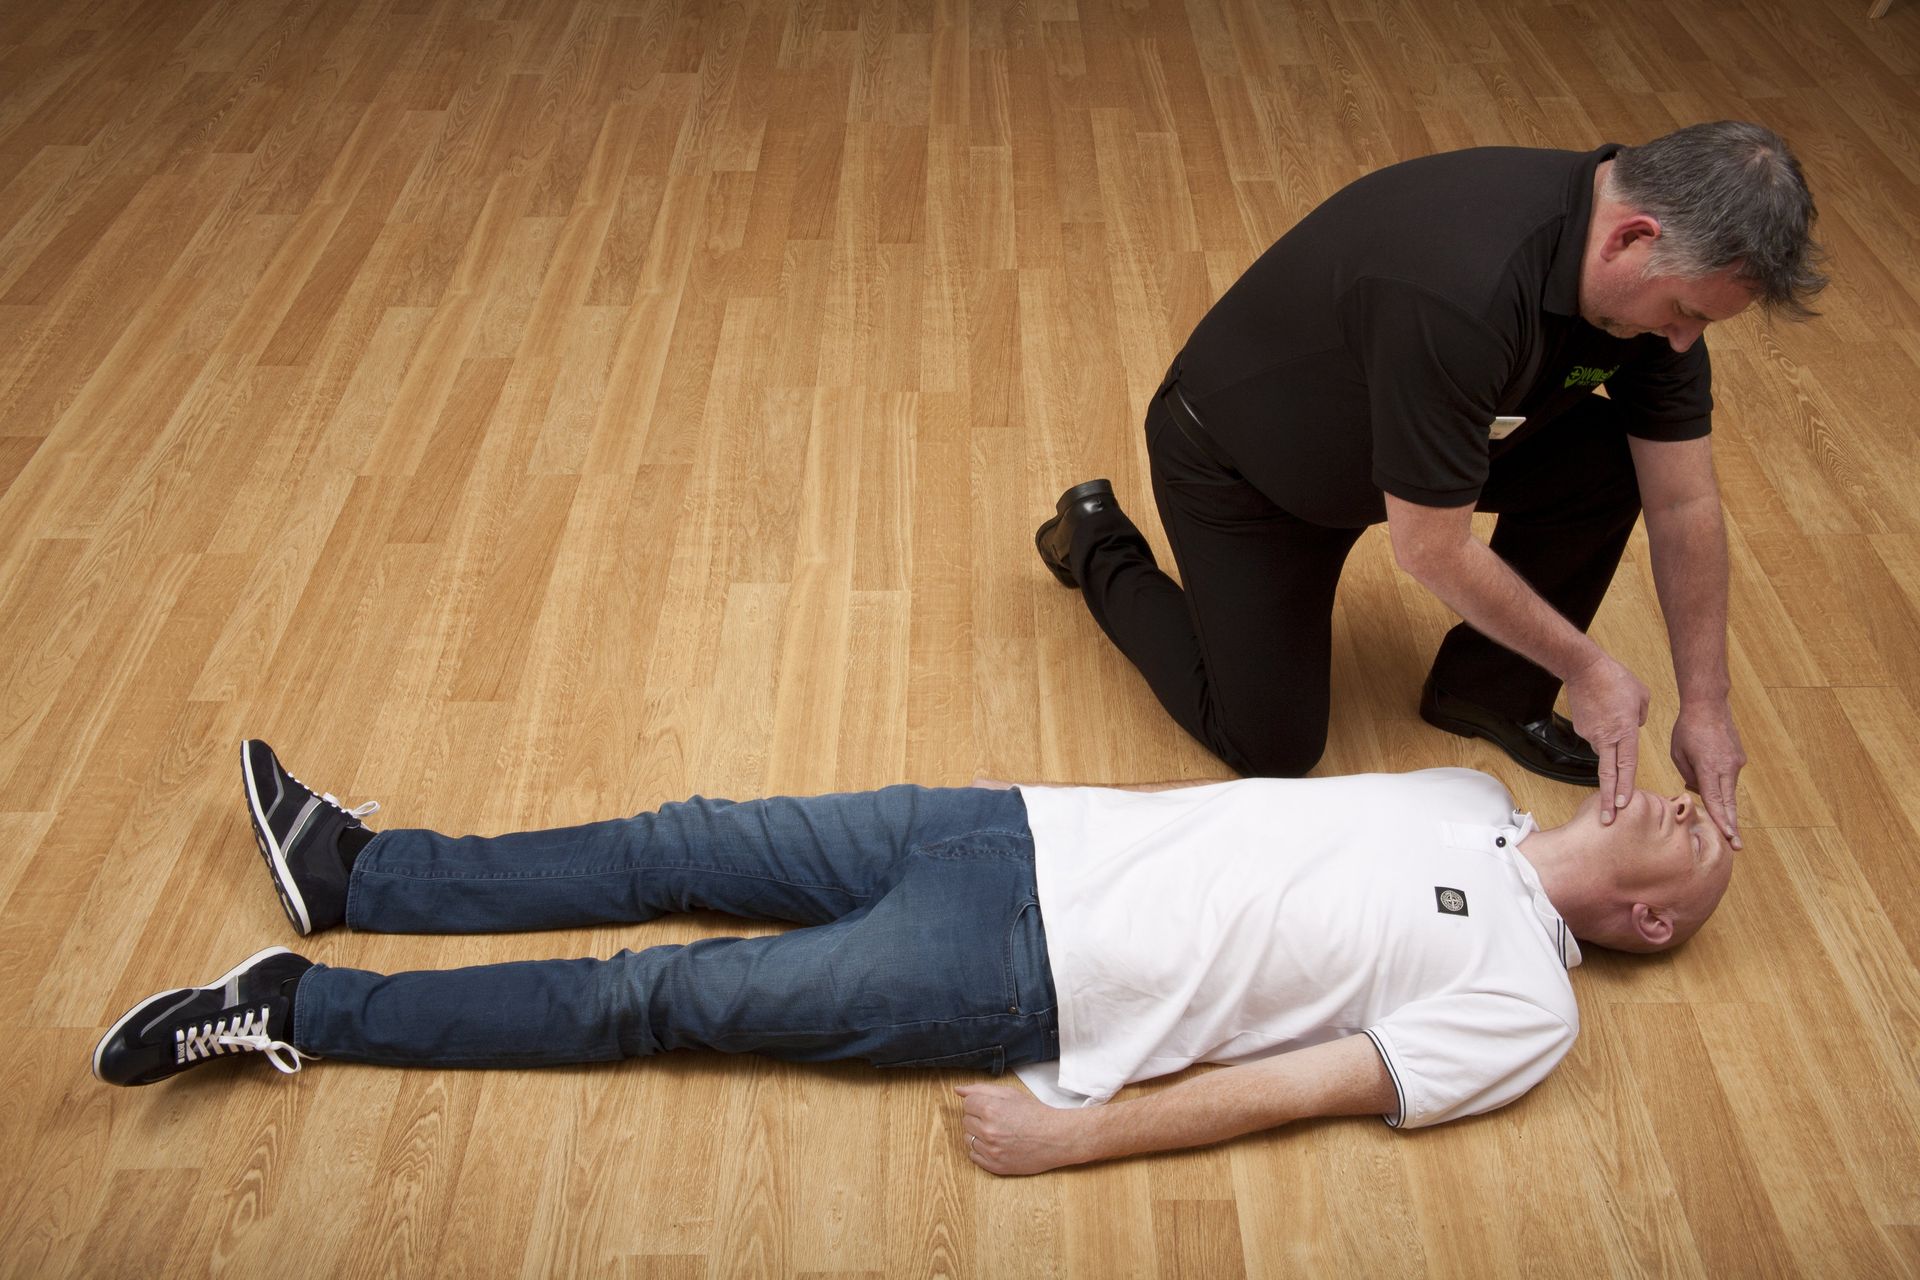 Providers of Care Home Basic Life Support Training UK